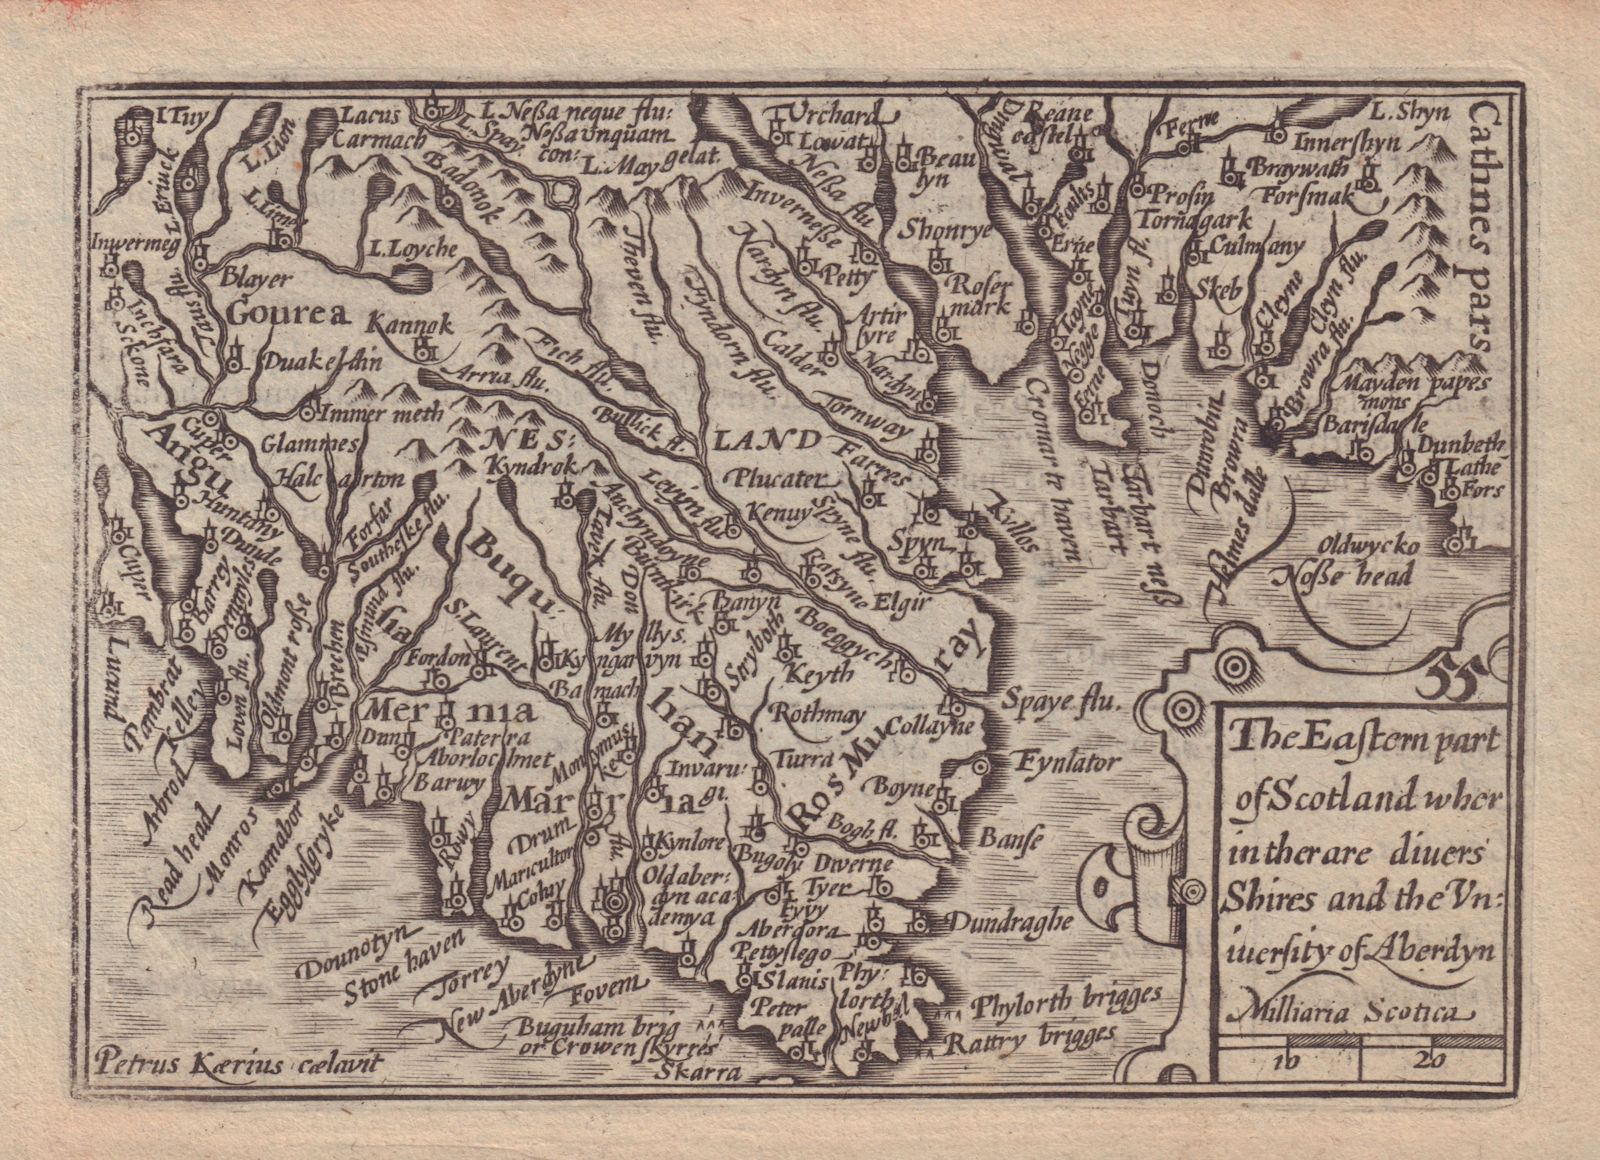 The [North] Eastern part of Scotland… by Keere. "Speed miniature" 1632 old map